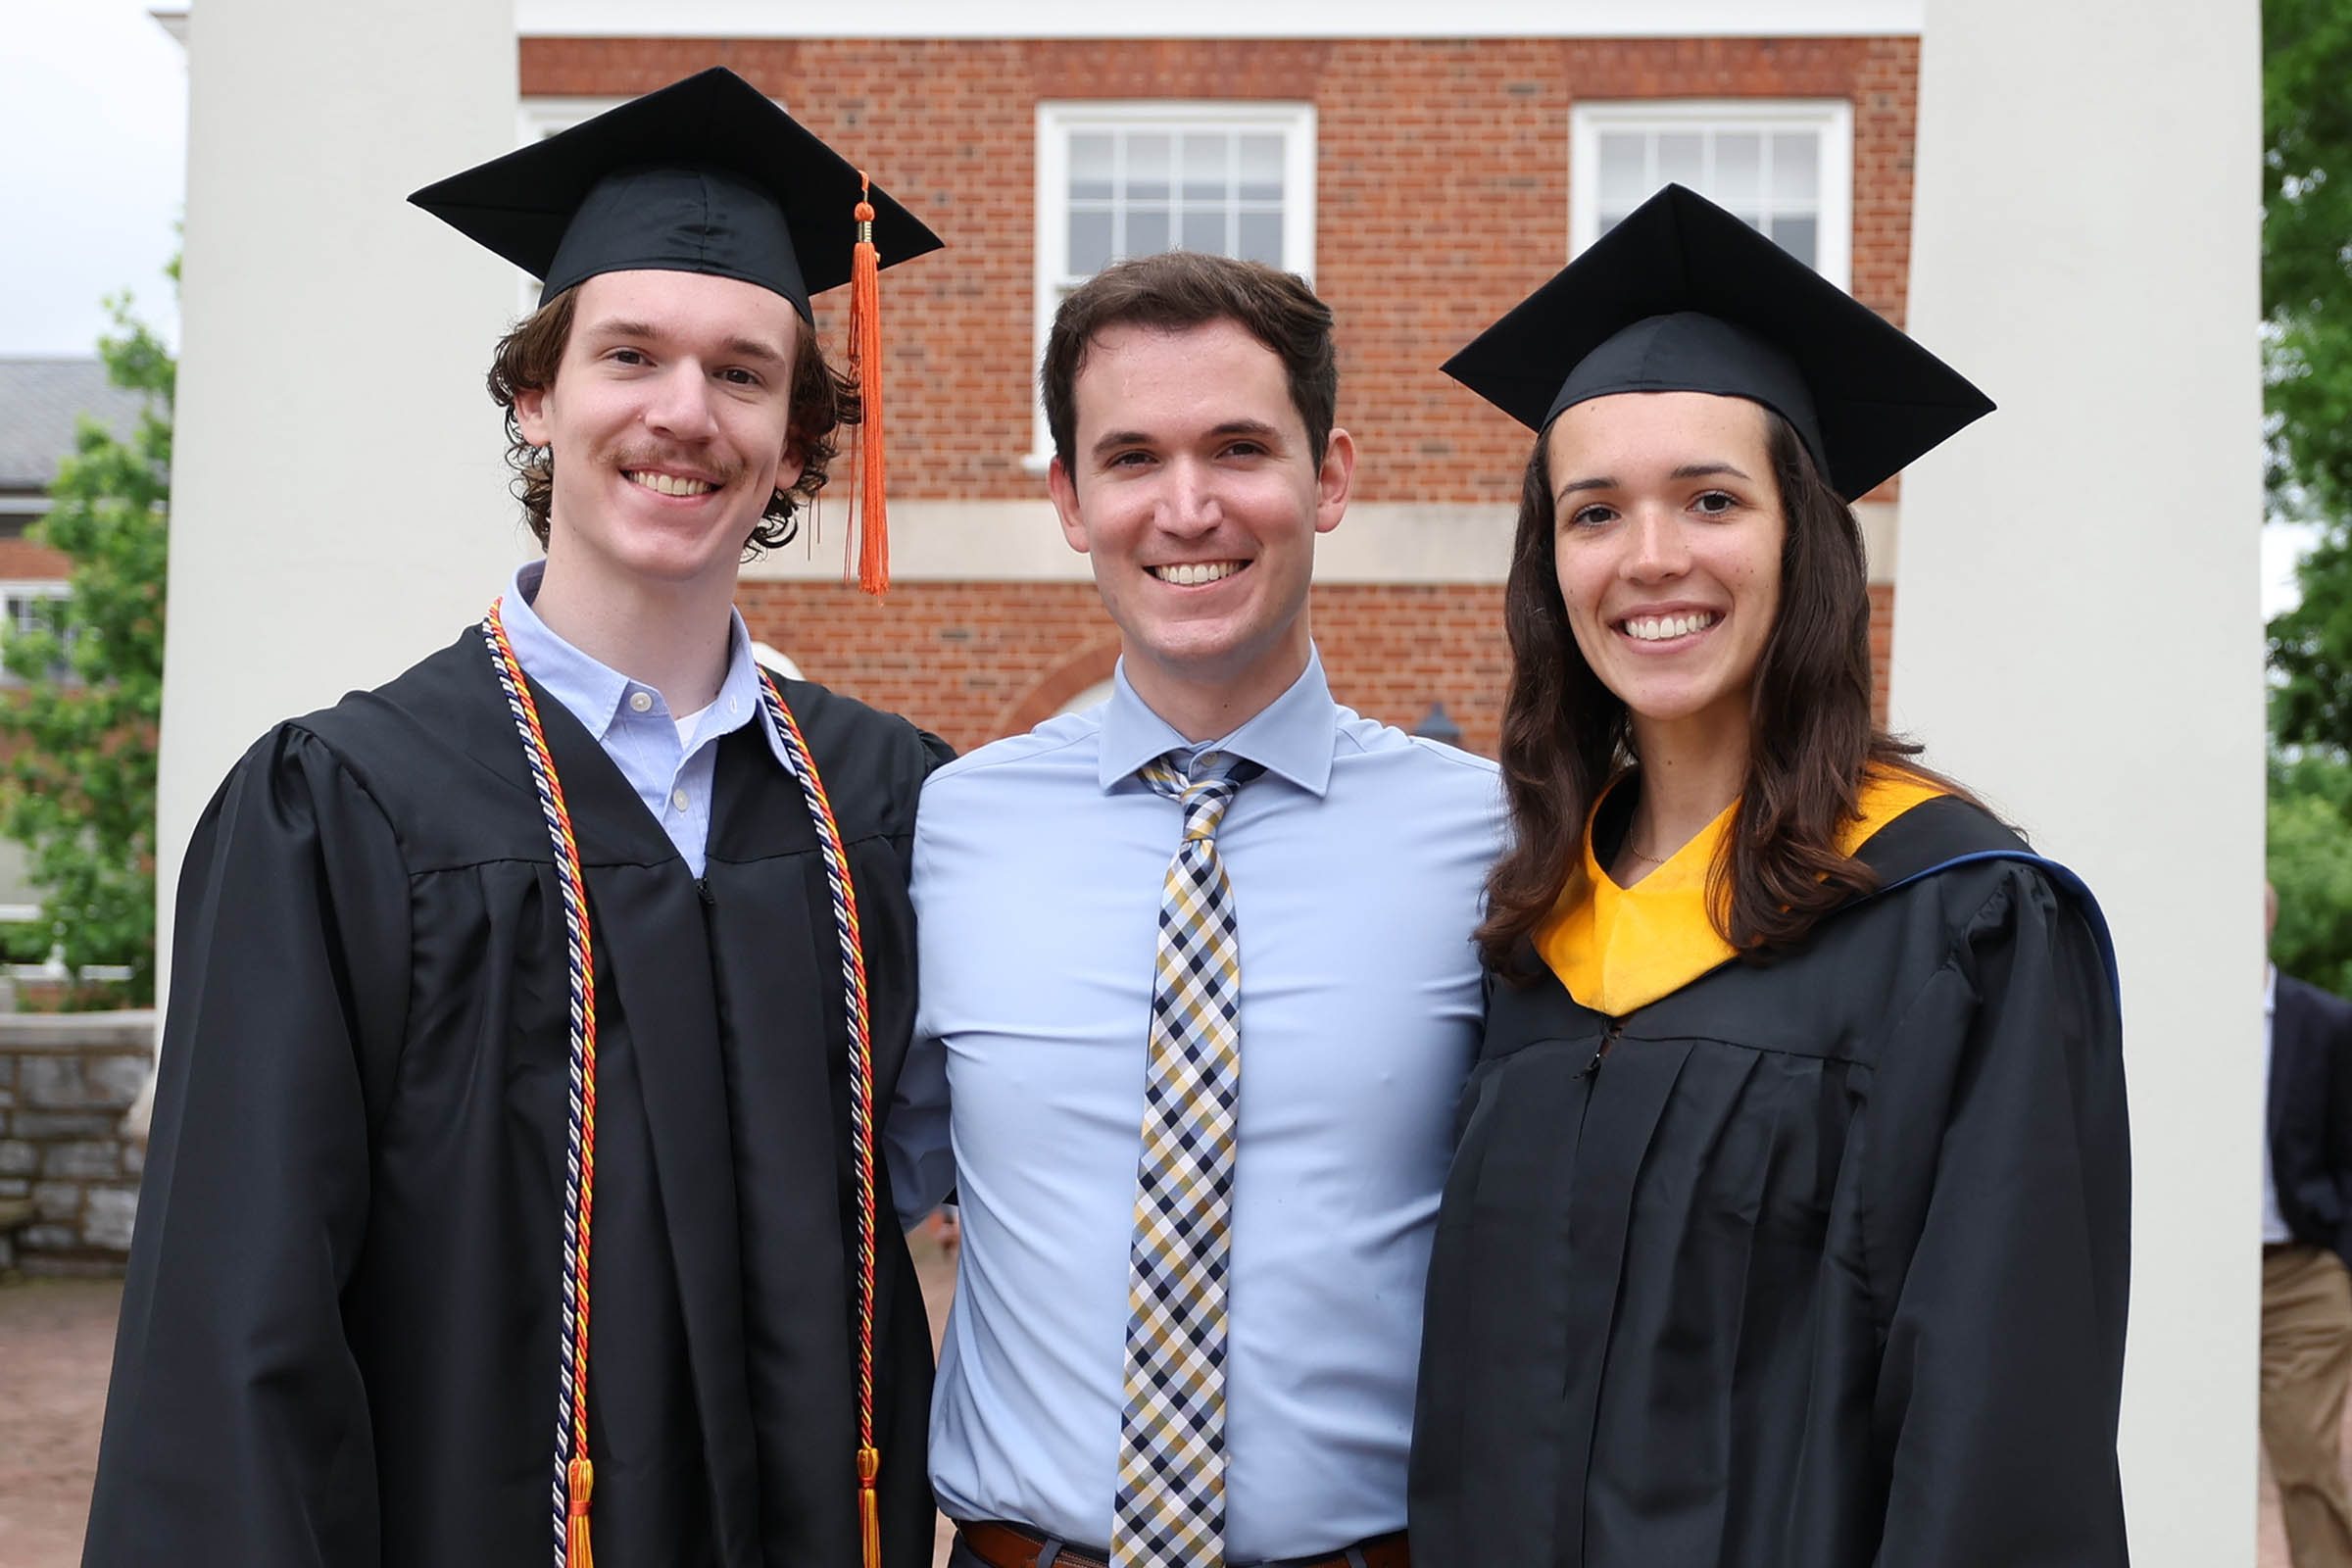 2018 alumnus J.C. Panagides, center, returned to Grounds to attend the graduations of his siblings, Anthony, left, a computer science major; and Reanna, right, who received a master’s degree in data science.